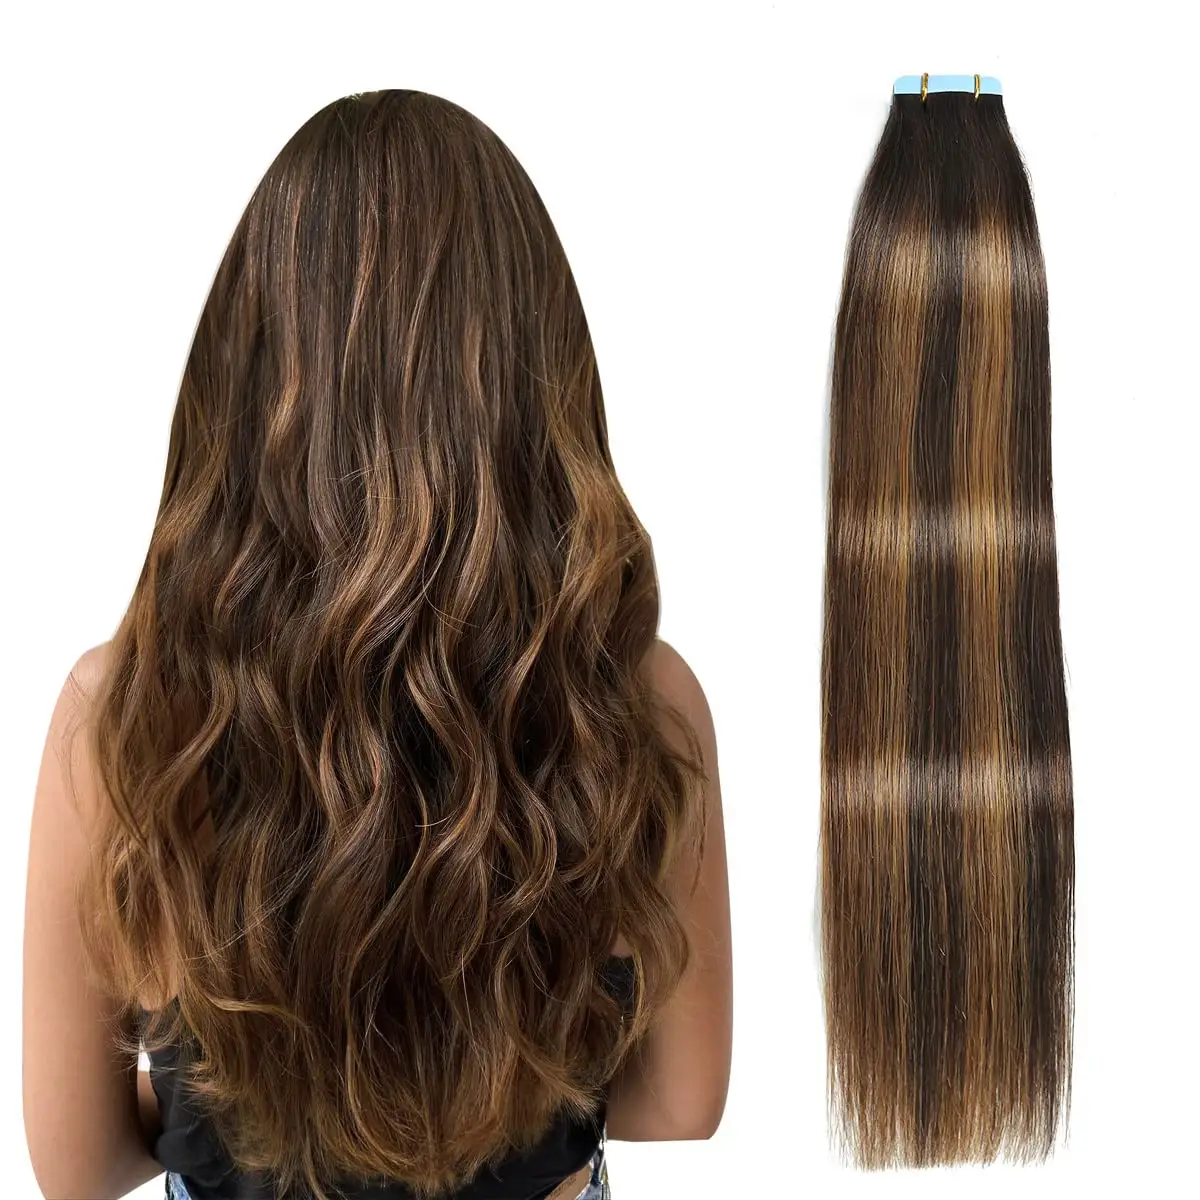 100% human hair extensions remy cuticle tape in hair extensions Sillky straight No any split ends tape weft hair extensions